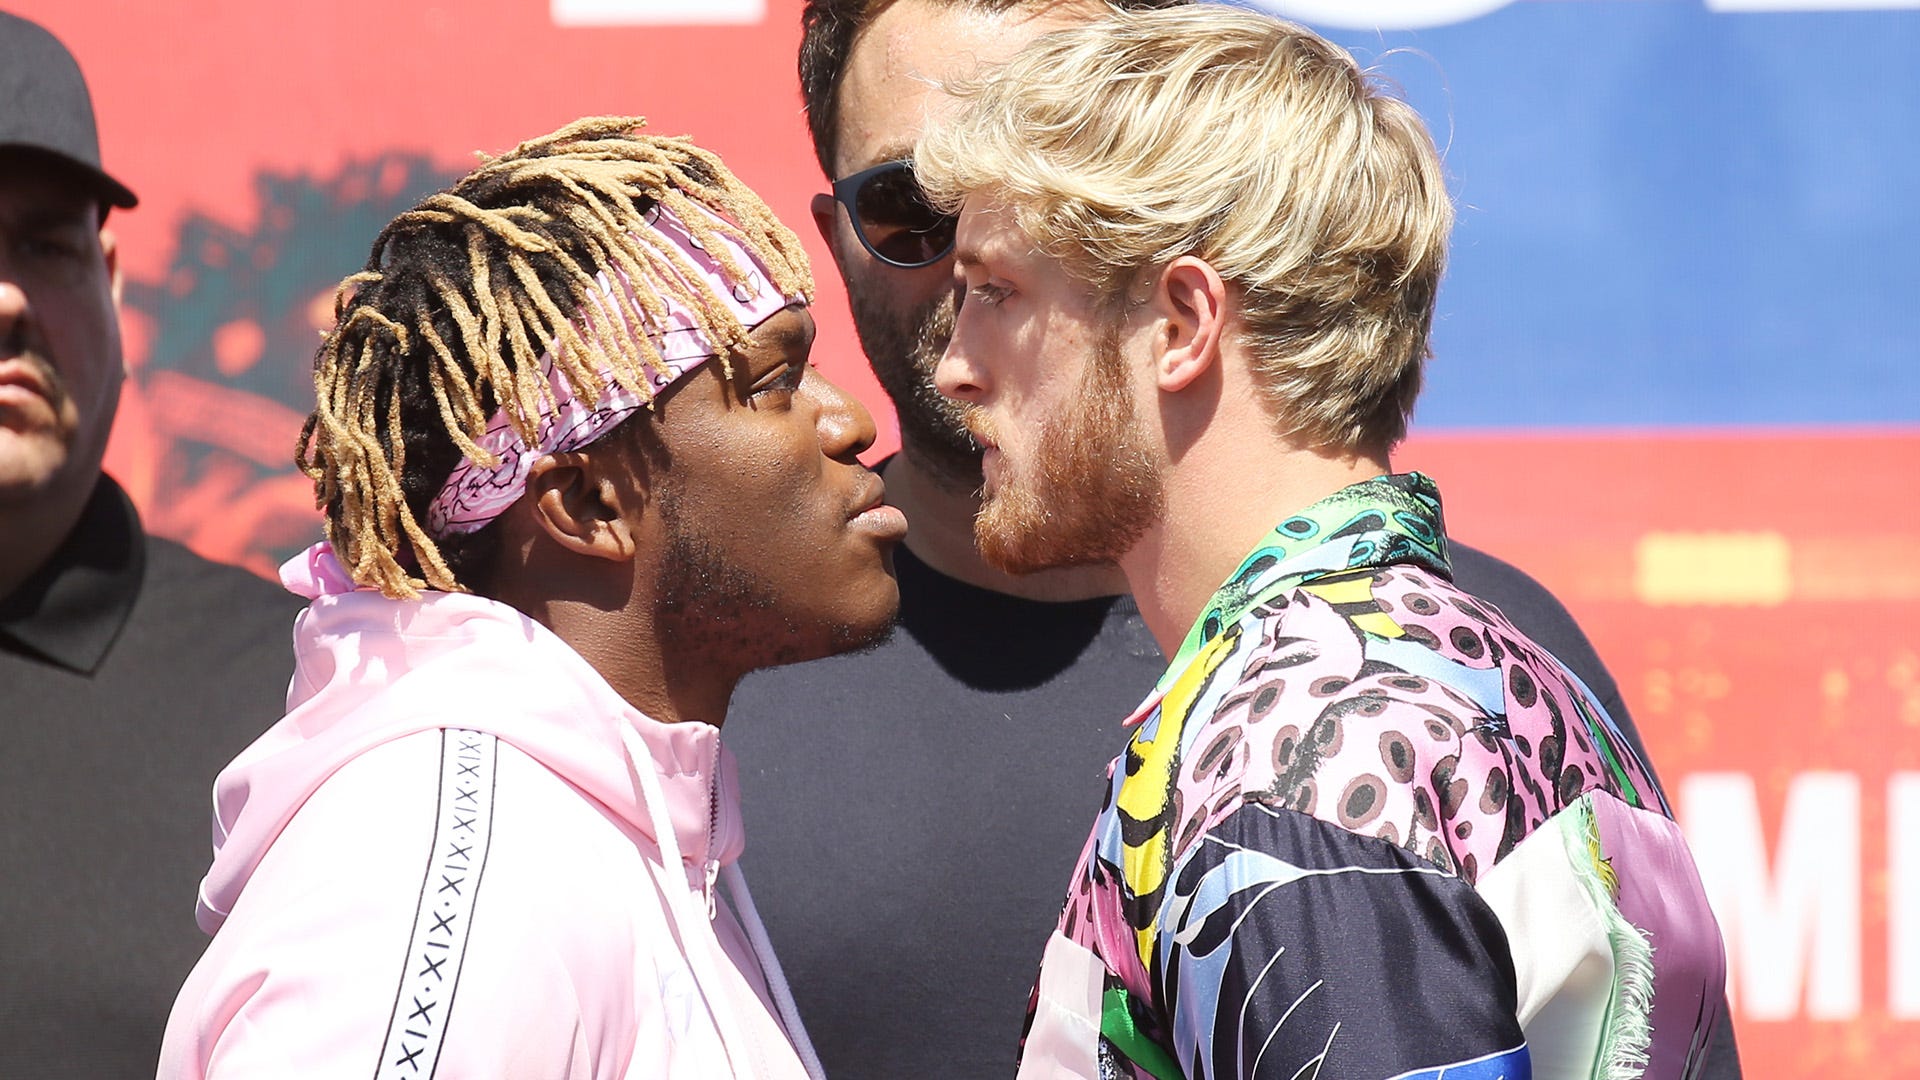 KSI and Logan Paul had a lucrative boxing fight.